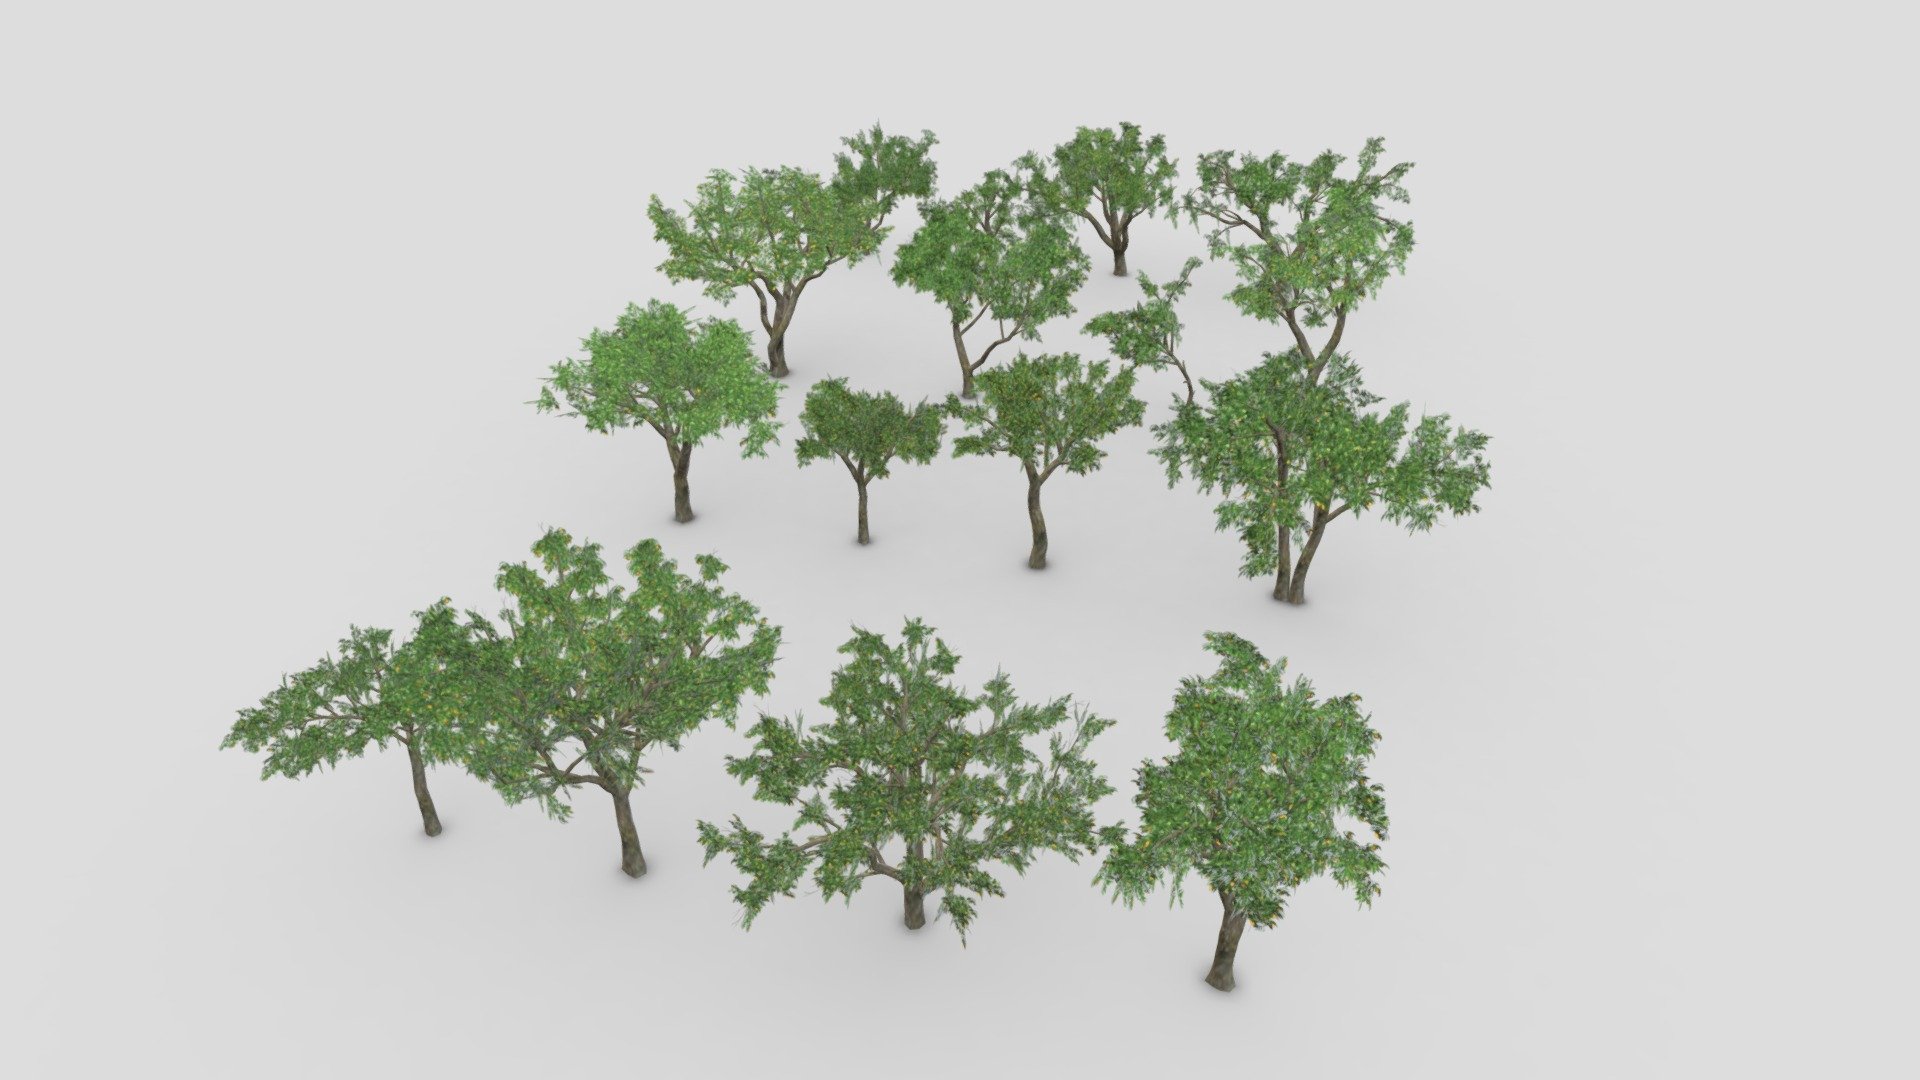 This collection contains 16 3D low-poly poly models of Orange Tree. You can use these models in your projects 3d model